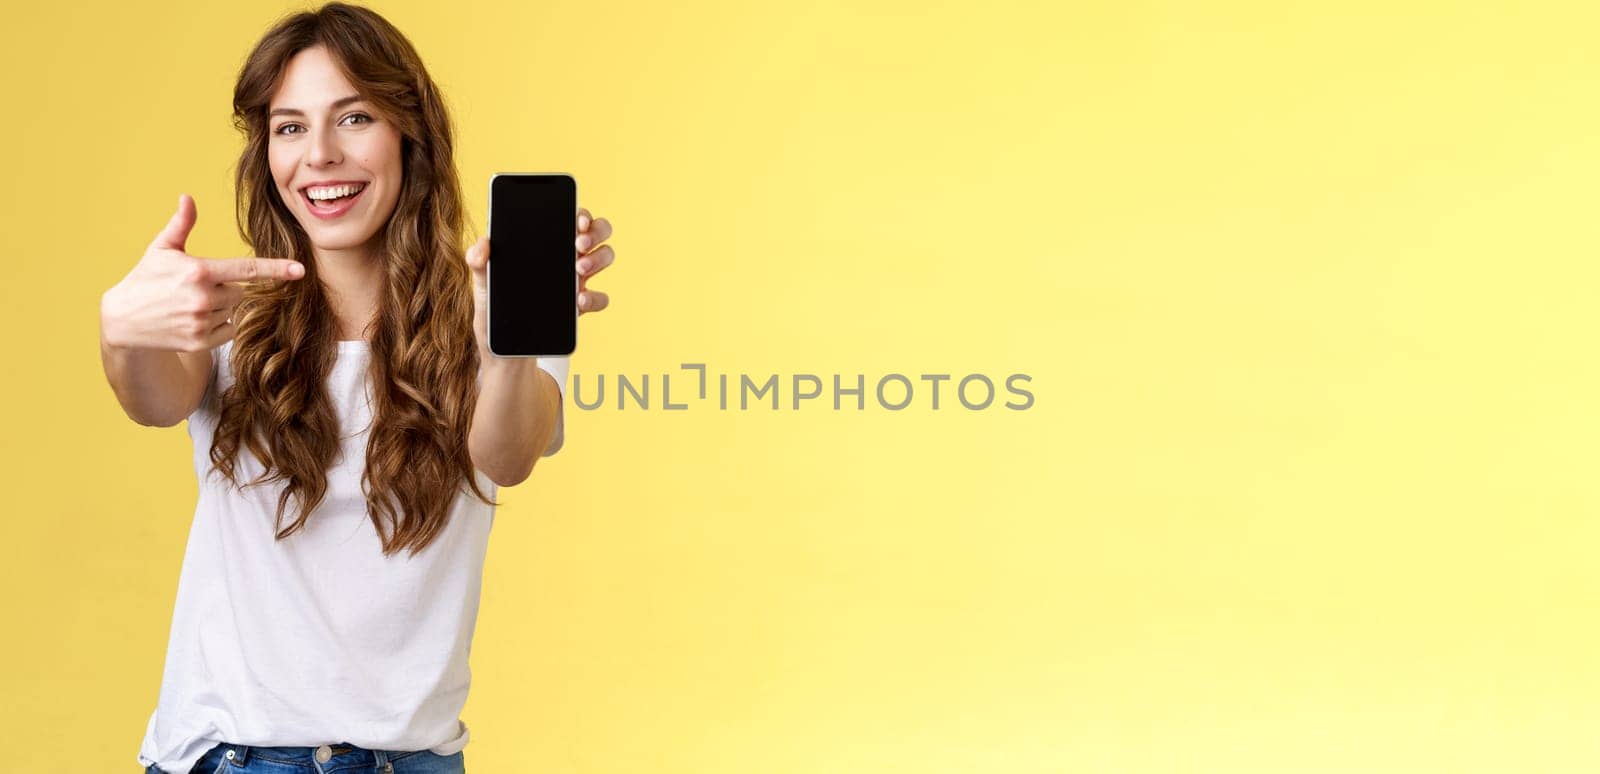 Cheerful sassy good-looking sociable girl curly long hair extend arm holding smartphone pointing index finger mobile phone screen smiling broadly recommend cool app blogger promote social page. Lifestyle.